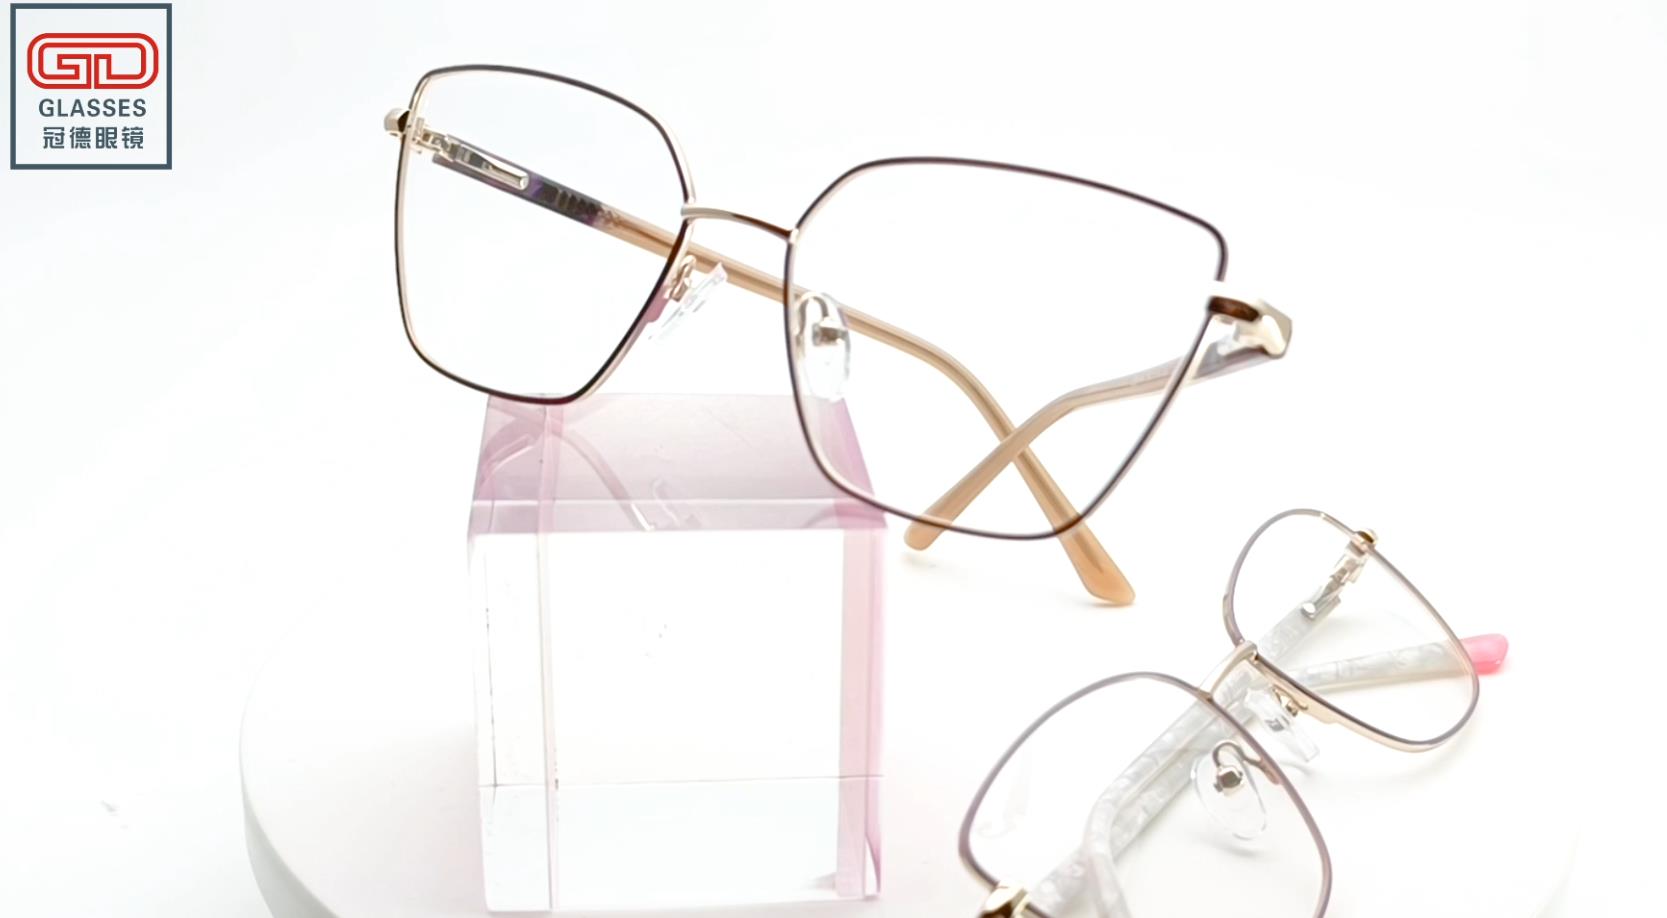 Protect Your Vision and Enhance Your Eyesight with Proper Glasses Care